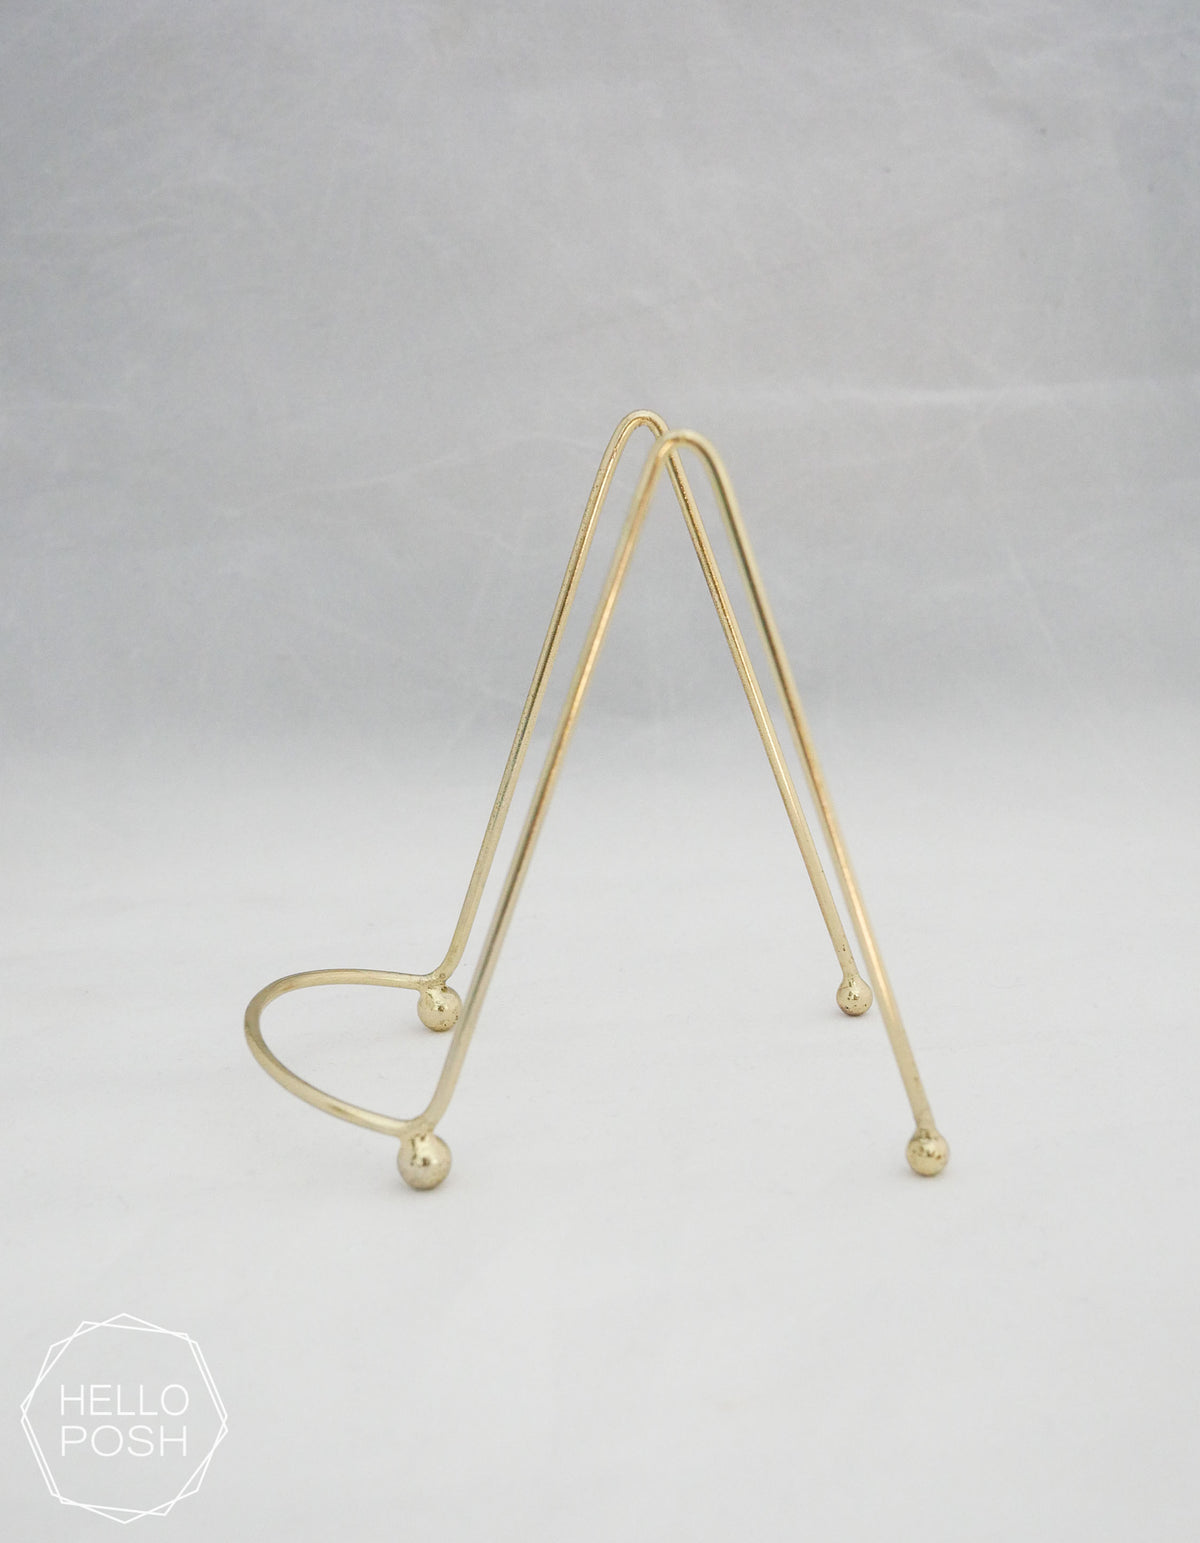 Small gold easels; Brass display stands